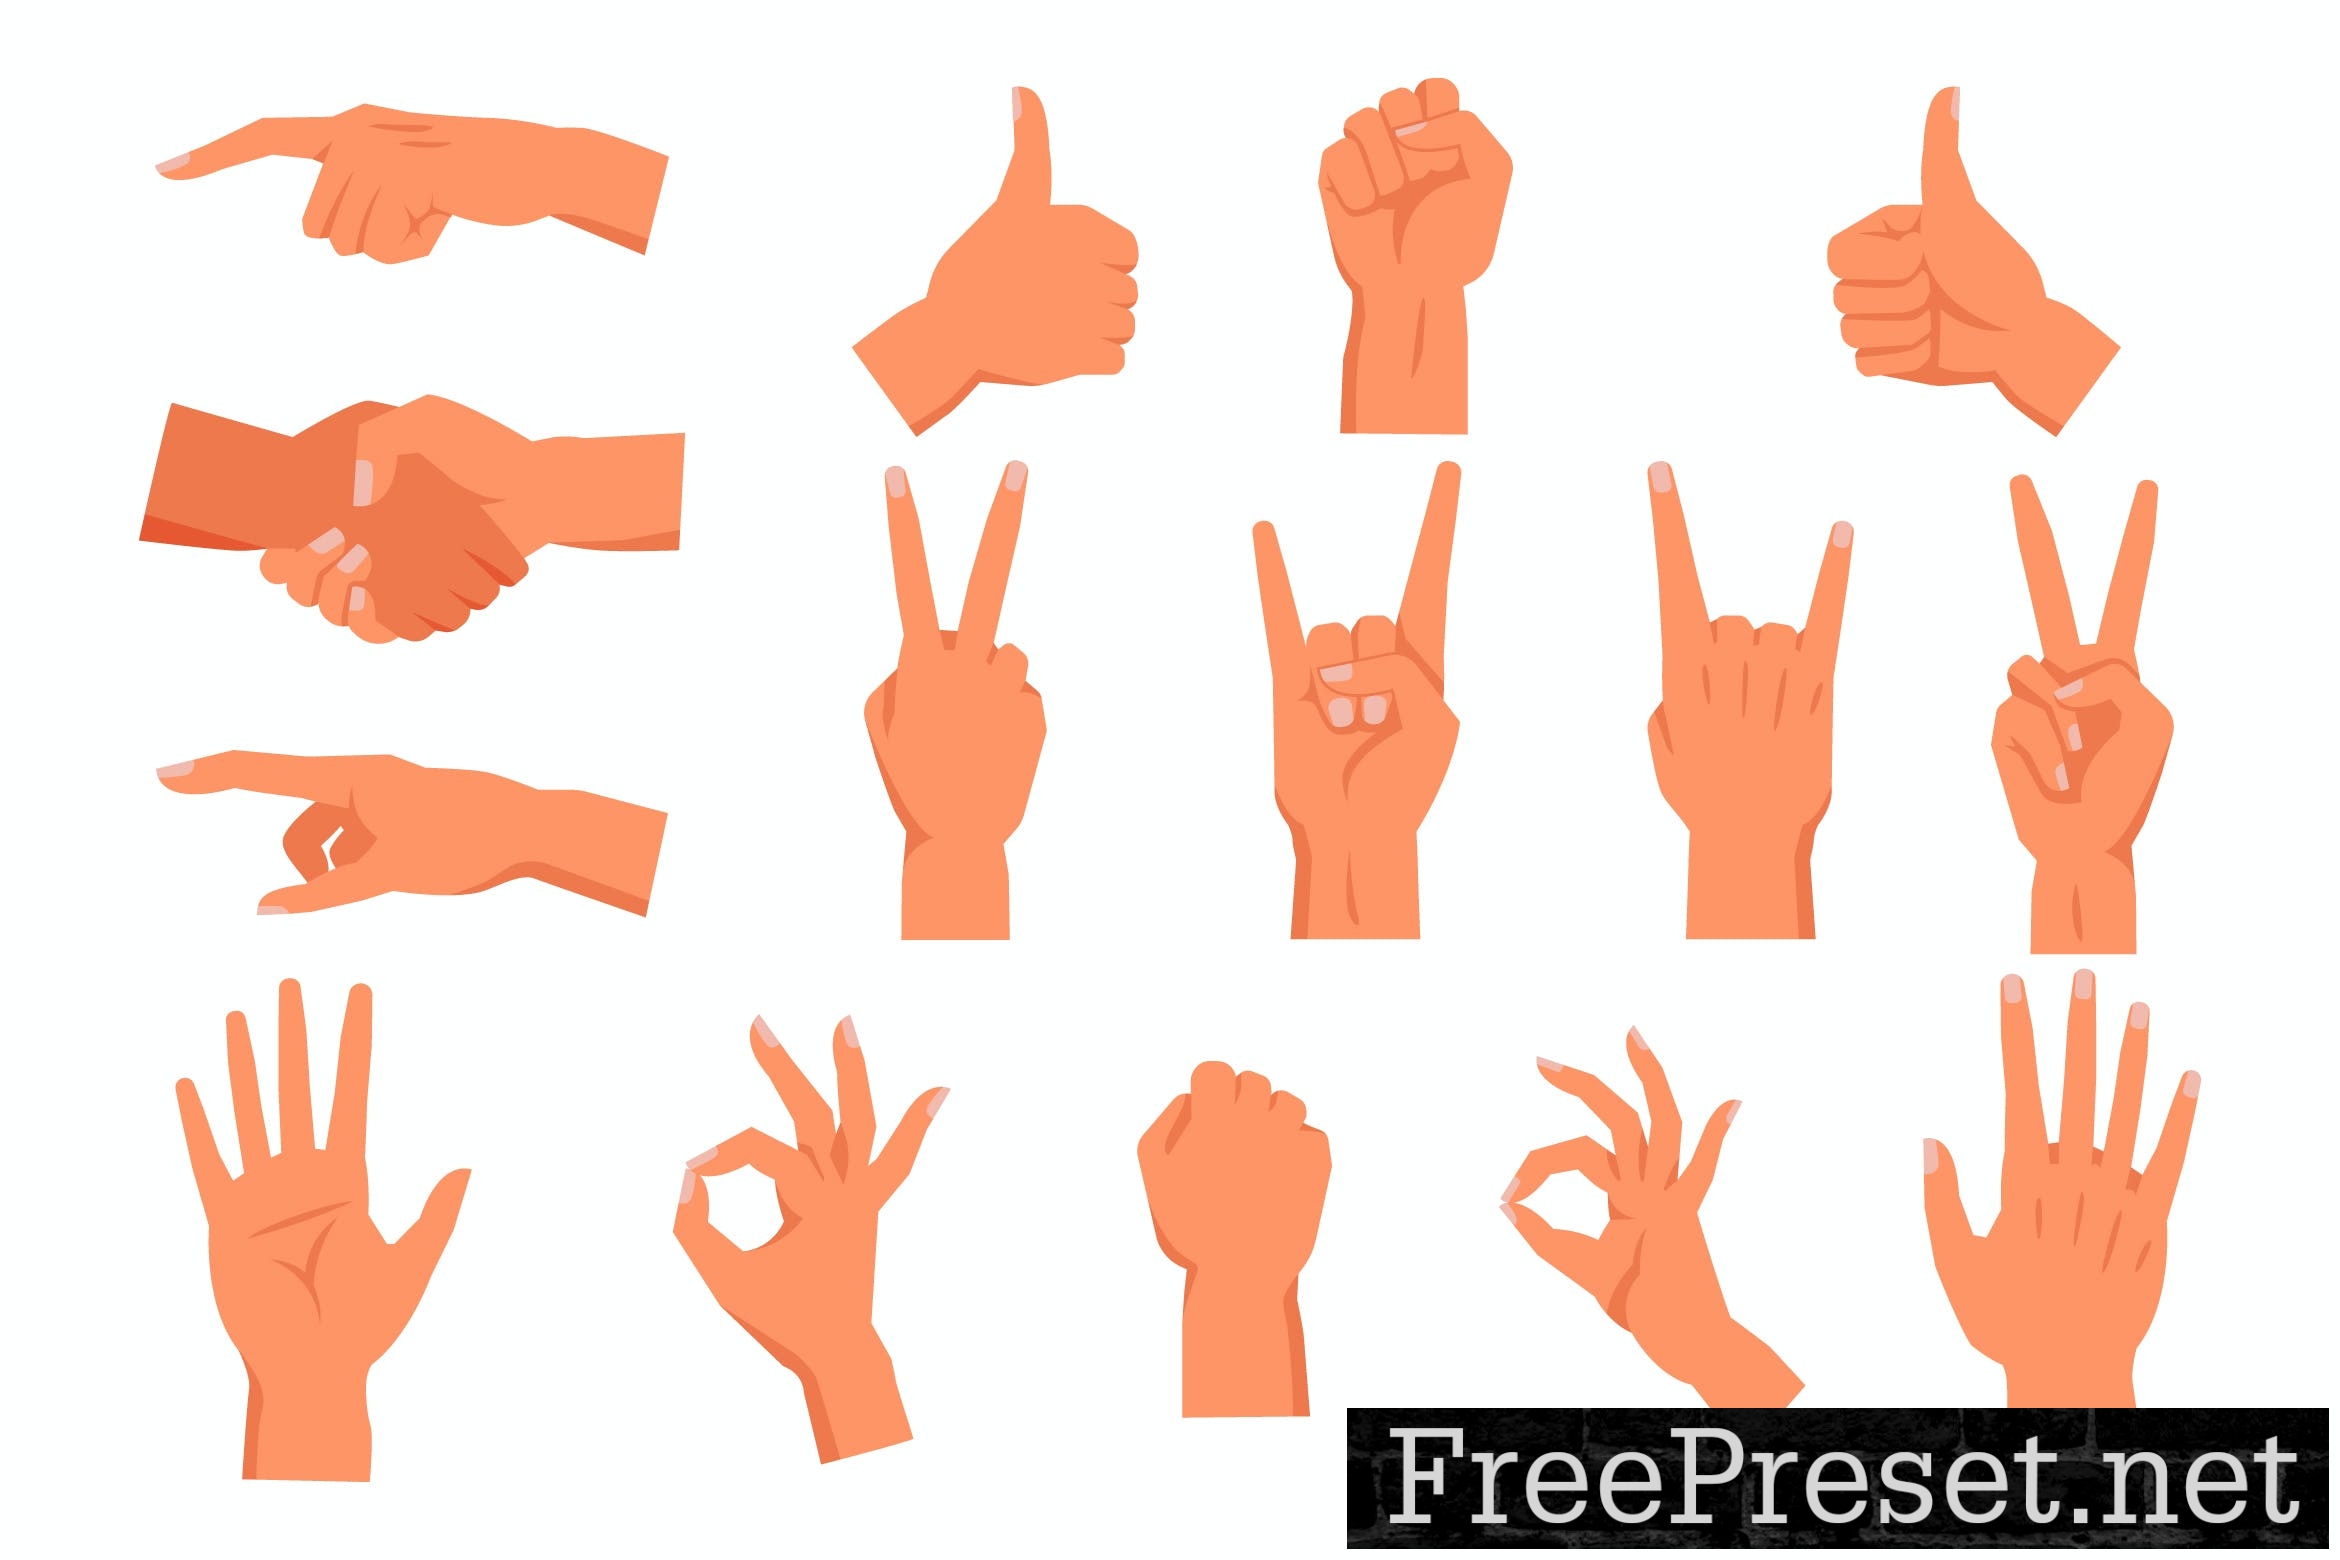 Hand gestures: From clenched fist to fist pump - BBC Ideas